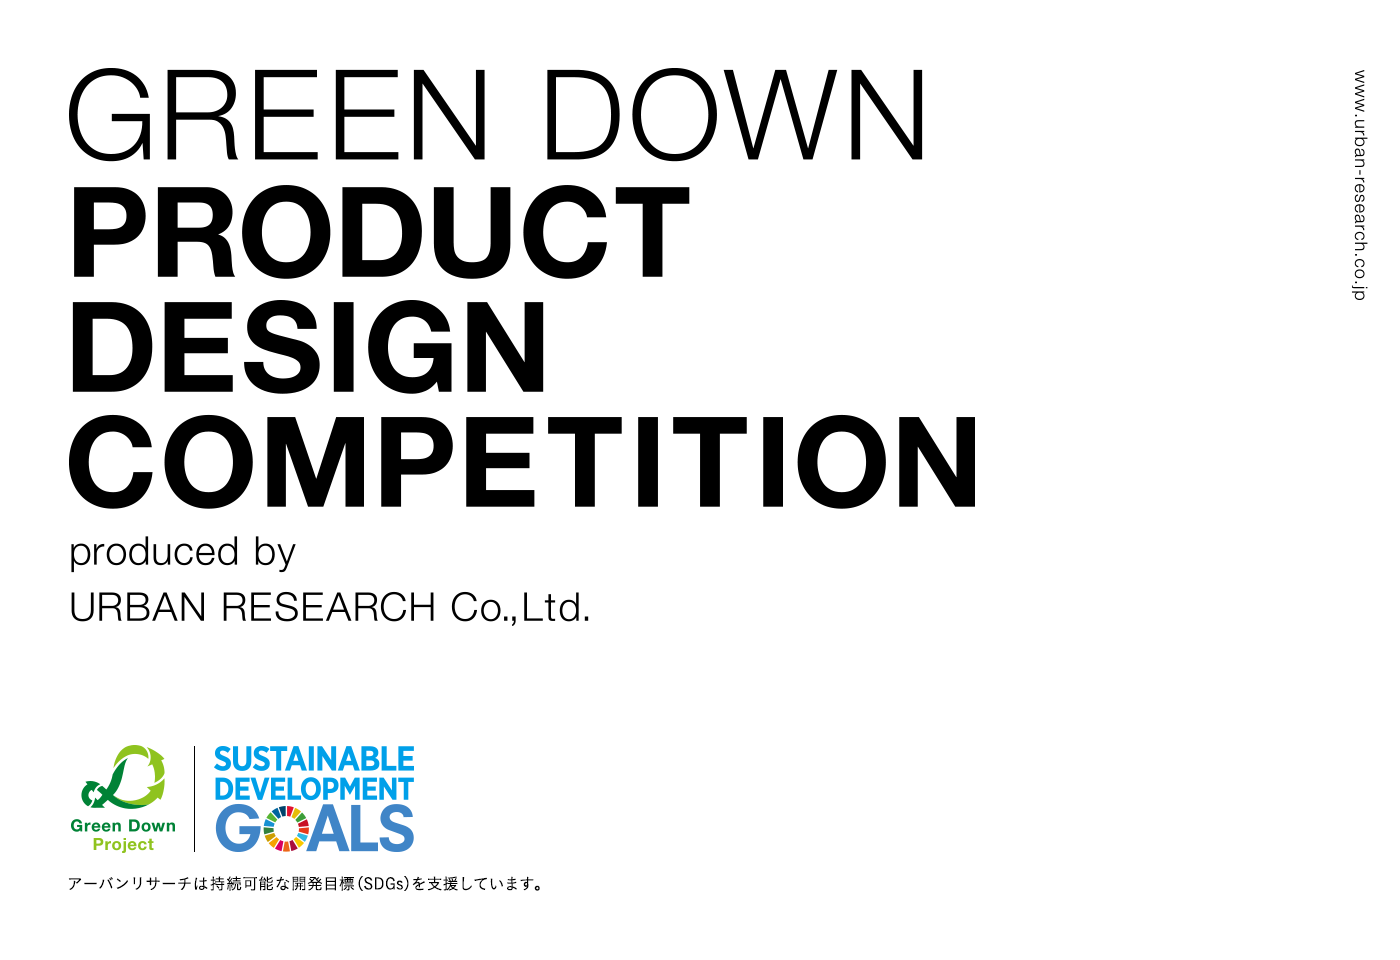 GREEN DOWN PRODUCT DESIGN COMPETITION